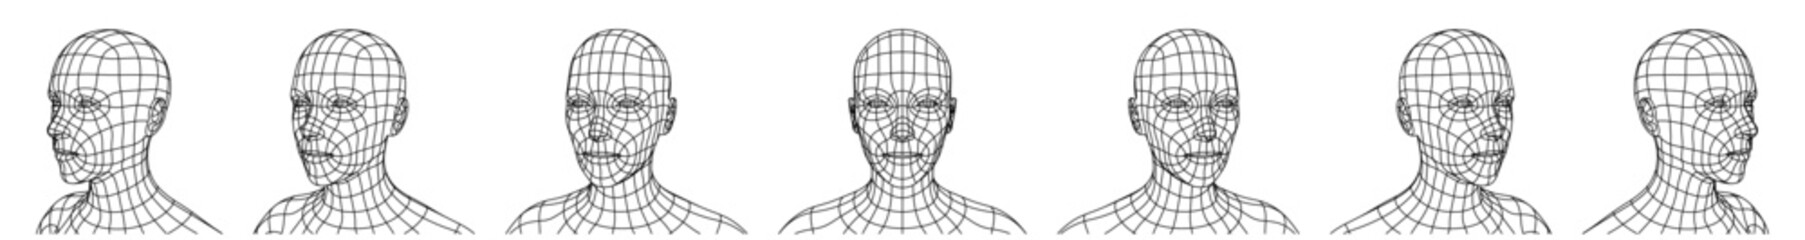 Wireframe Mesh Polygonal Human Head in Different Angles